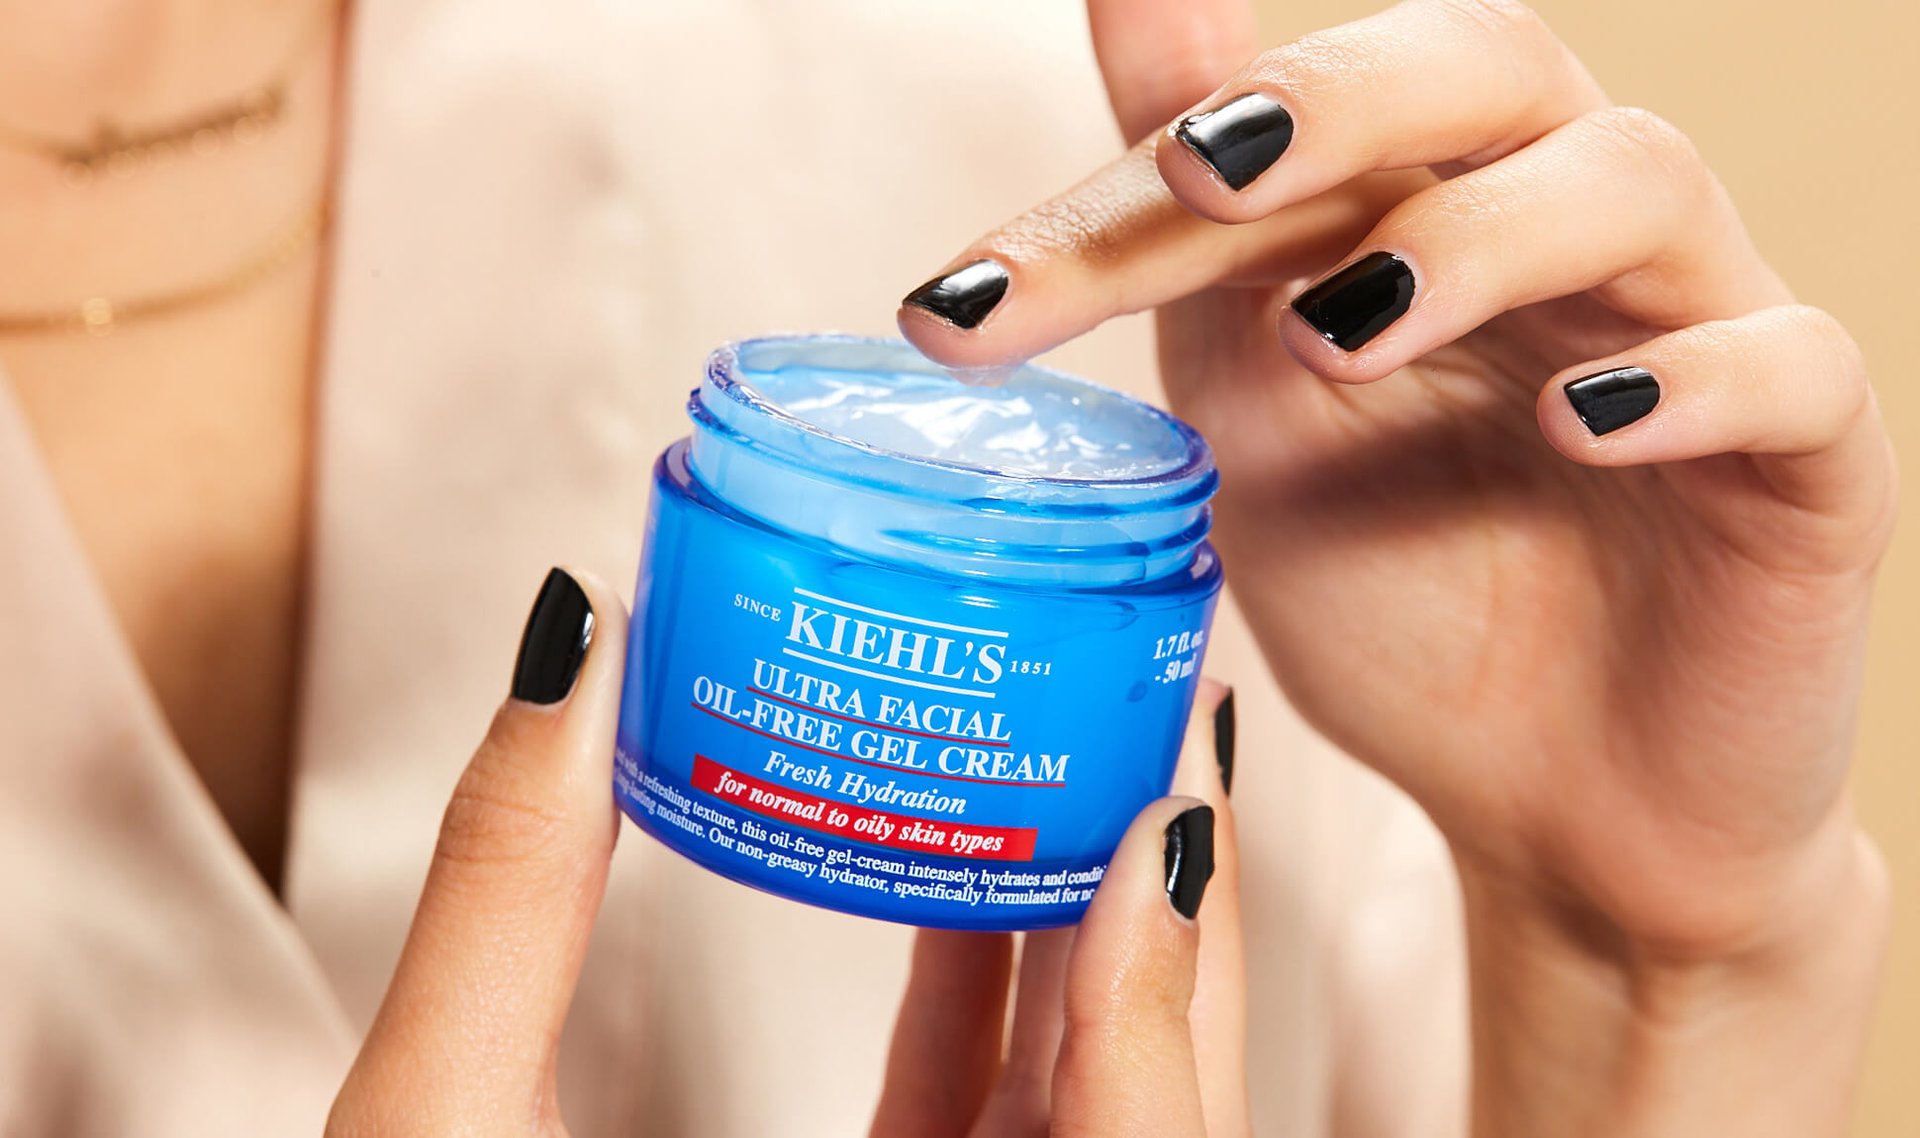 The Best Kiehl's Moisturizers for Your Skin Type